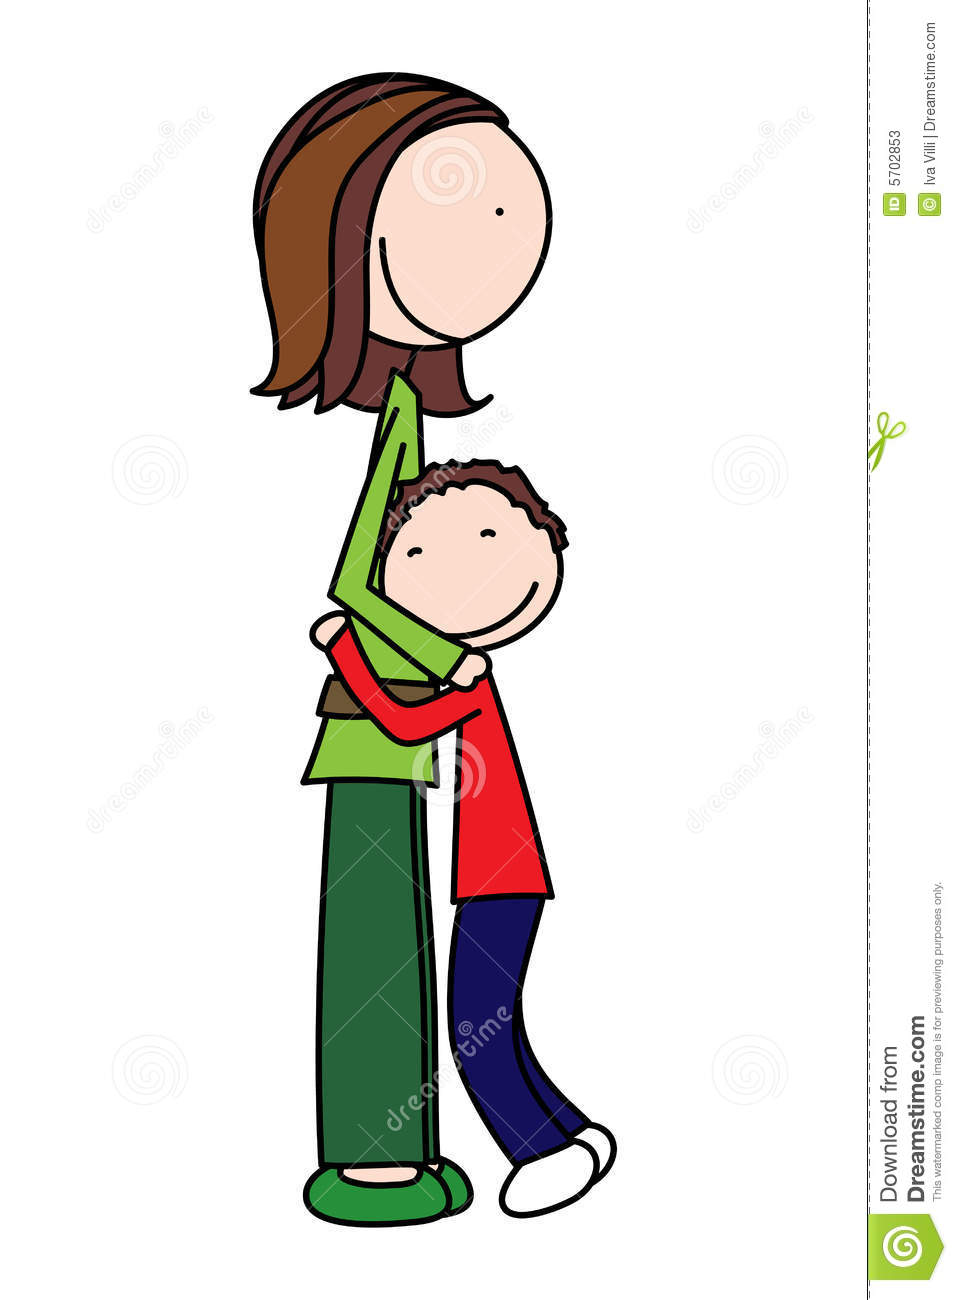 Mother And Son Stock Photos   Image  5702853